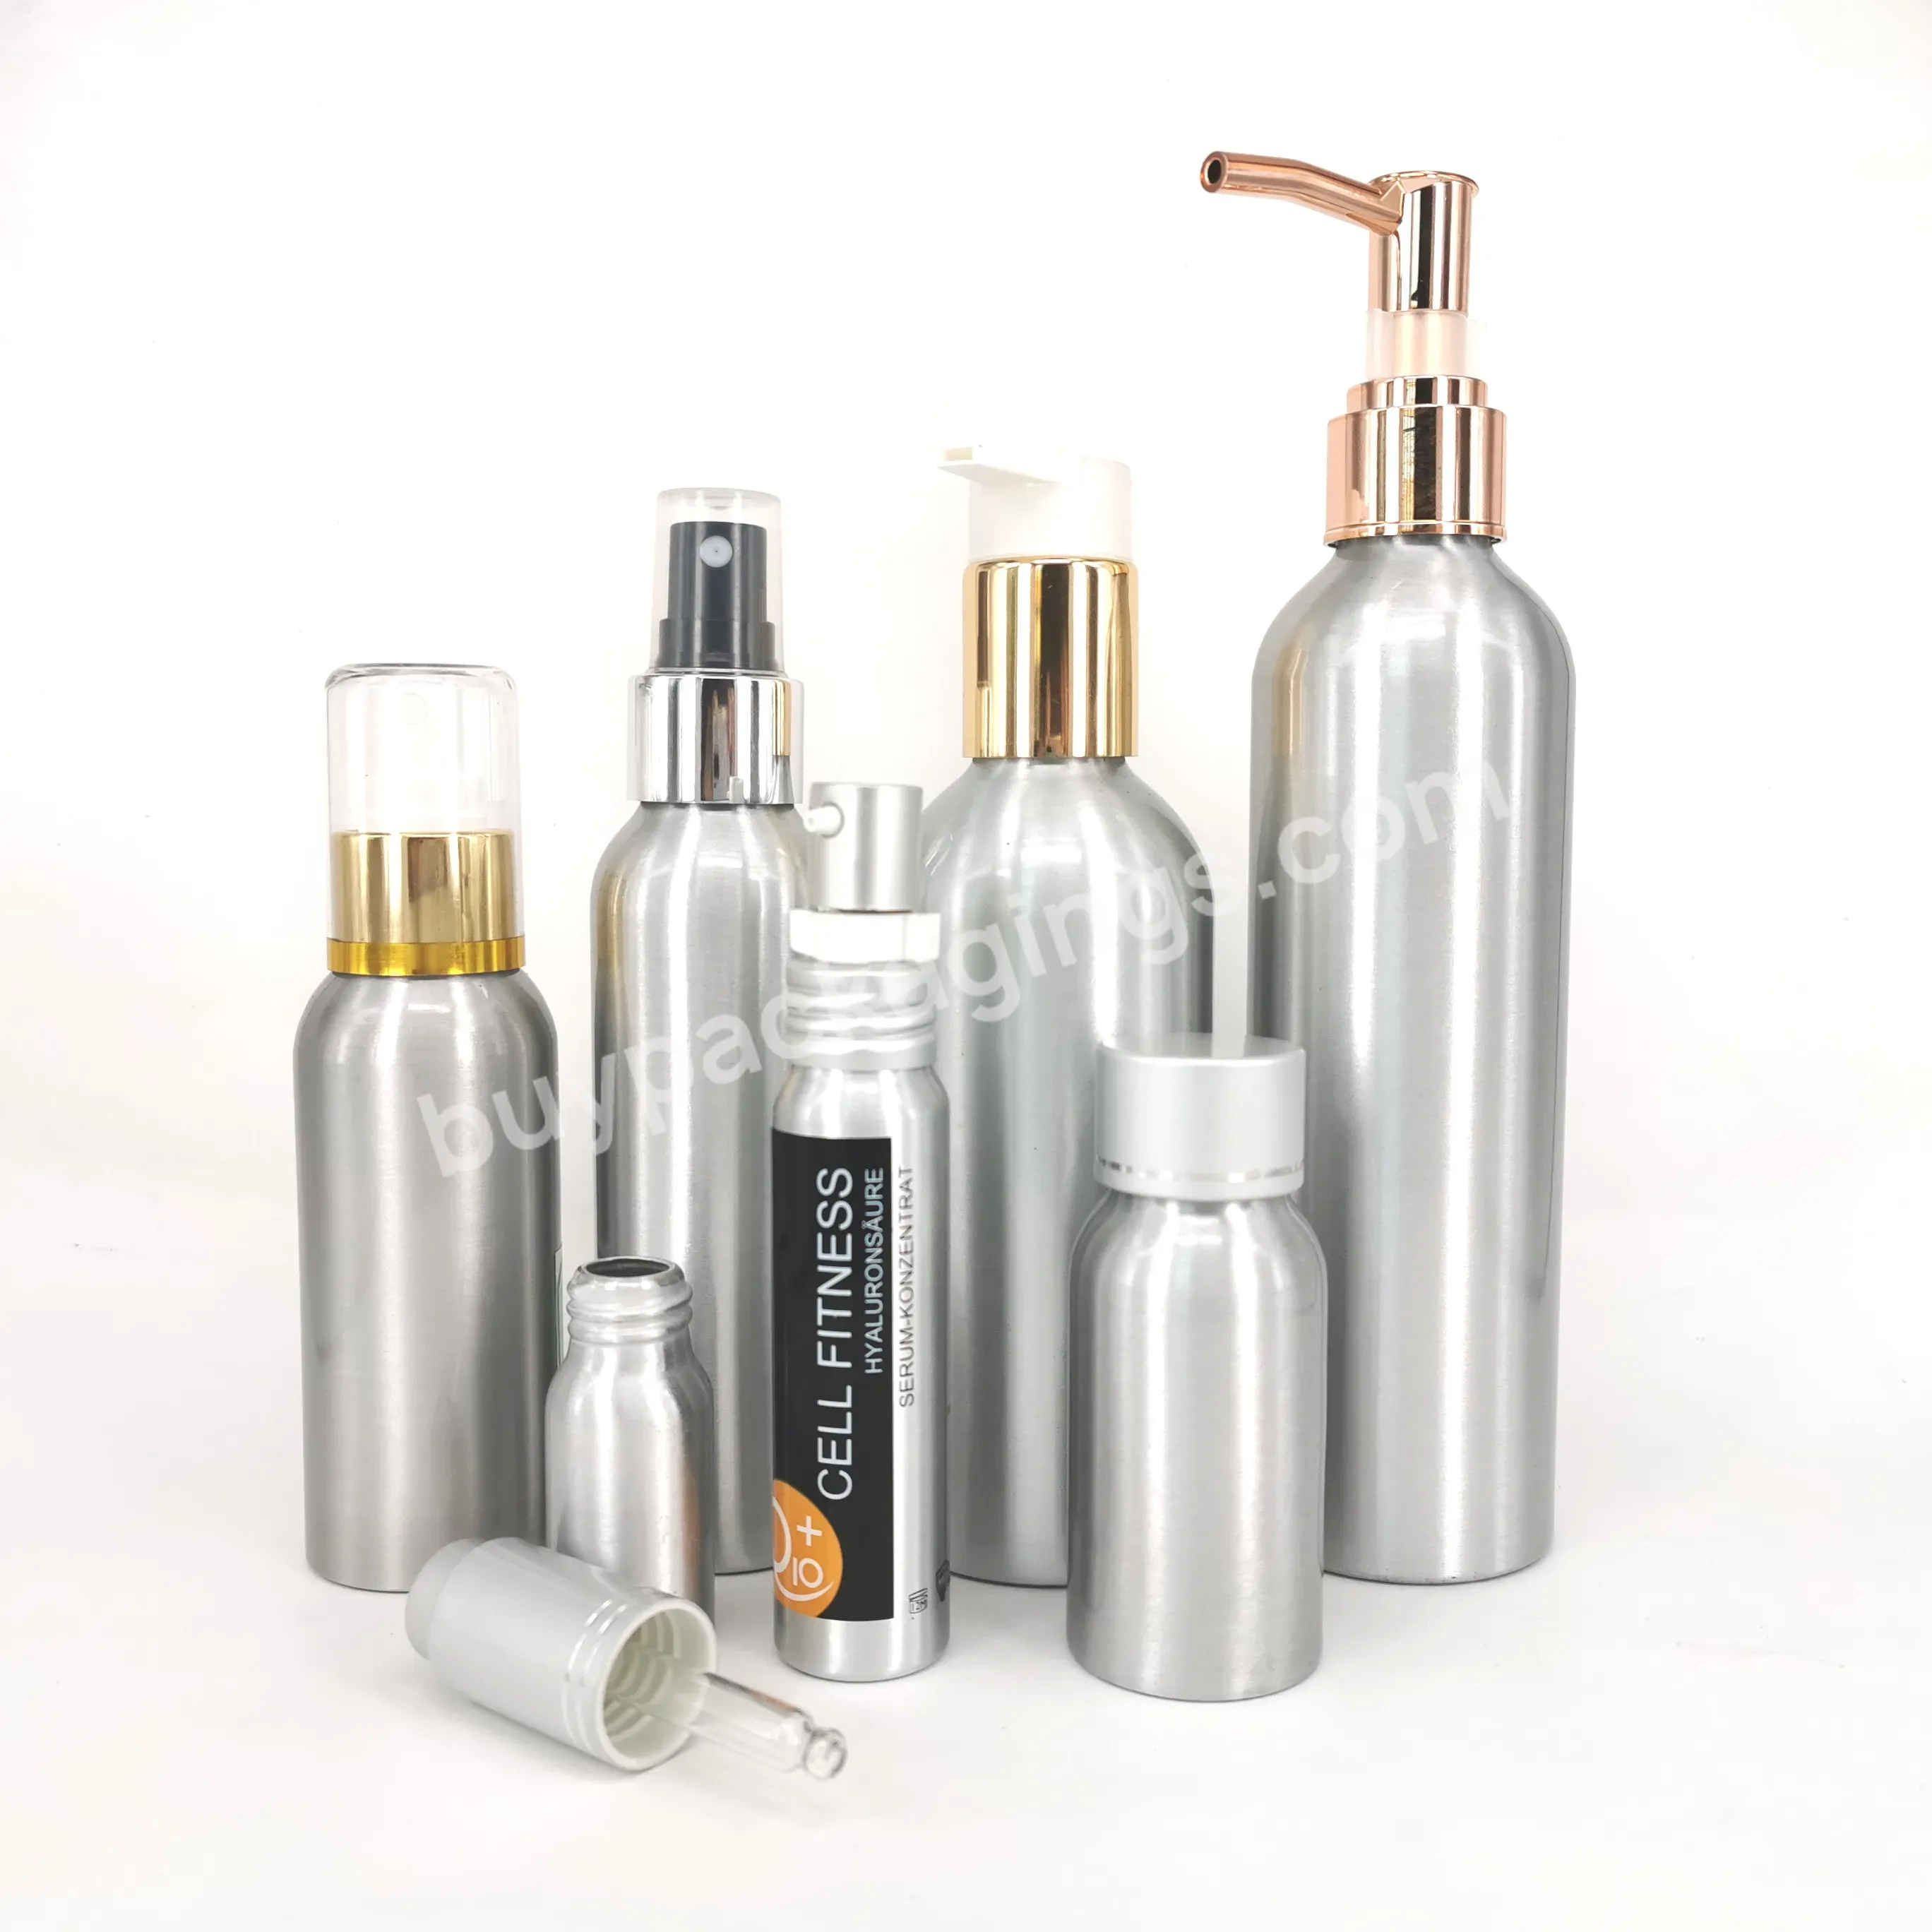 High Quality Small Aluminum Cosmetic Bottle - Buy Aluminum Cosmetic Bottle,Small Aluminum Cosmetic Bottle,High Quality Aluminum Cosmetic Bottle.